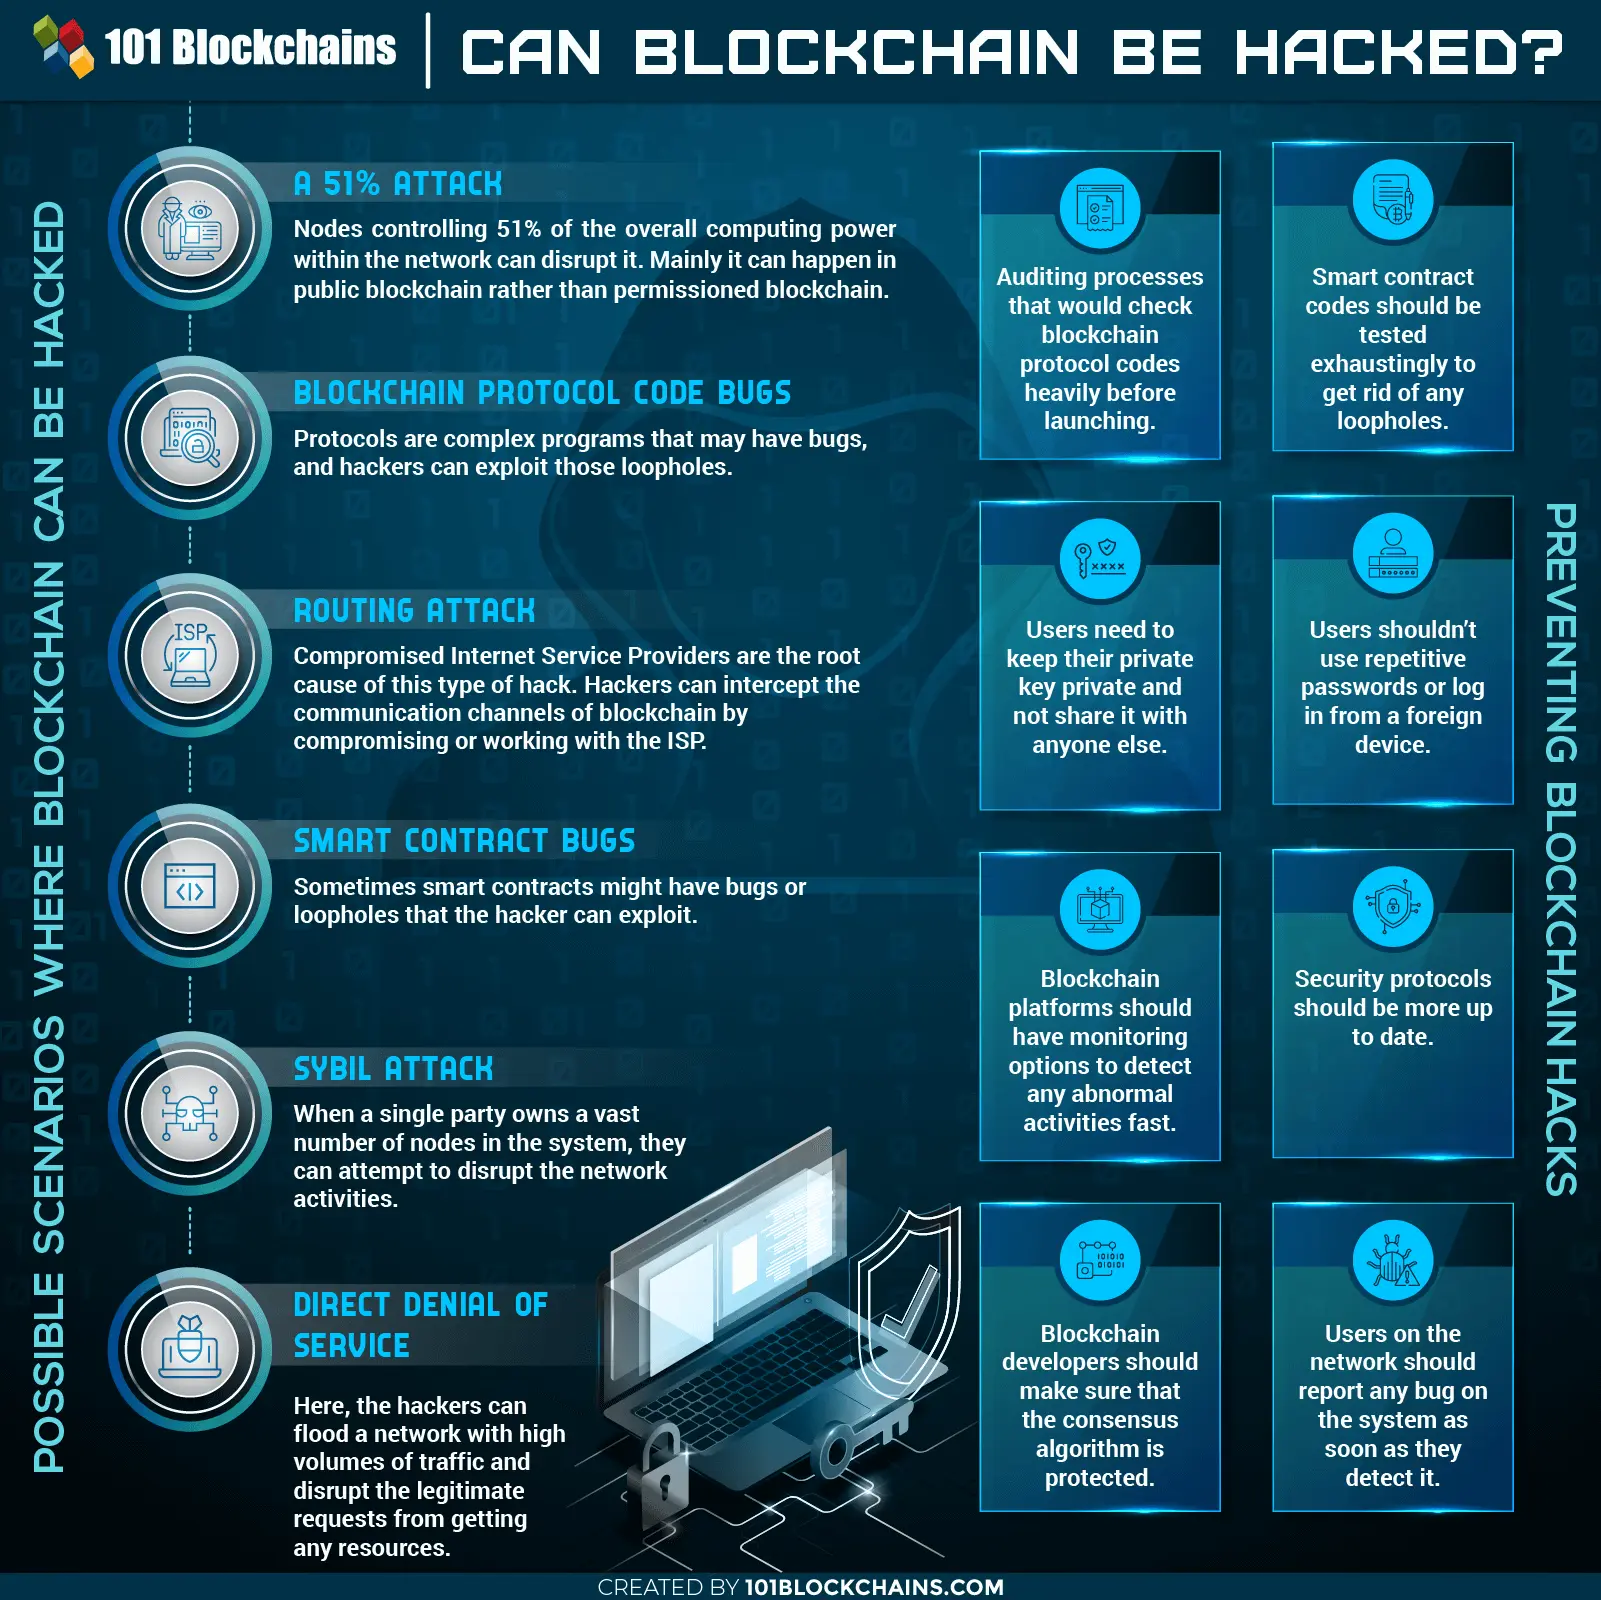 Can Blockchain Be Hacked 101 Blockchains